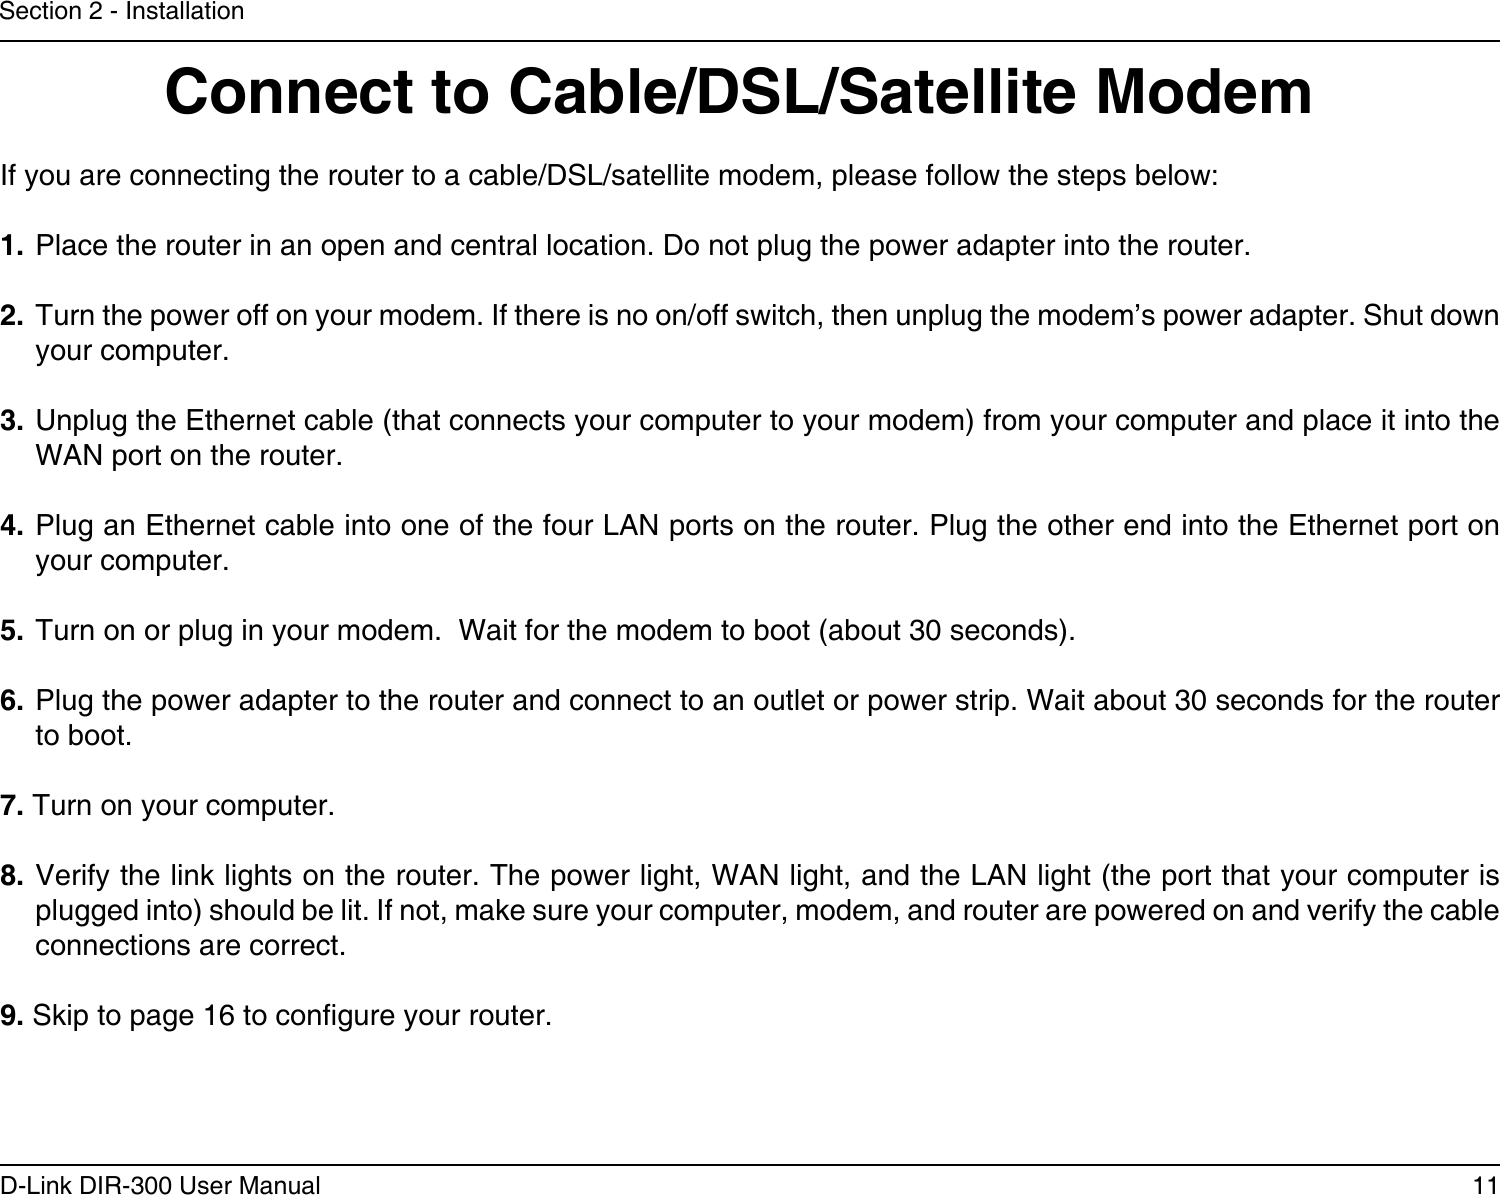 11D-Link DIR-300 User ManualSection 2 - InstallationIf you are connecting the router to a cable/DSL/satellite modem, please follow the steps below:1. Place the router in an open and central location. Do not plug the power adapter into the router. 2. Turn the power off on your modem. If there is no on/off switch, then unplug the modem’s power adapter. Shut down your computer.3. Unplug the Ethernet cable (that connects your computer to your modem) from your computer and place it into the WAN port on the router.  4. Plug an Ethernet cable into one of the four LAN ports on the router. Plug the other end into the Ethernet port on your computer.5. Turn on or plug in your modem.  Wait for the modem to boot (about 30 seconds). 6. Plug the power adapter to the router and connect to an outlet or power strip. Wait about 30 seconds for the router to boot. 7. Turn on your computer. 8. Verify the link lights on the router. The power light, WAN light, and the LAN light (the port that your computer is plugged into) should be lit. If not, make sure your computer, modem, and router are powered on and verify the cable connections are correct. 9. Skip to page 16 to congure your router. Connect to Cable/DSL/Satellite Modem